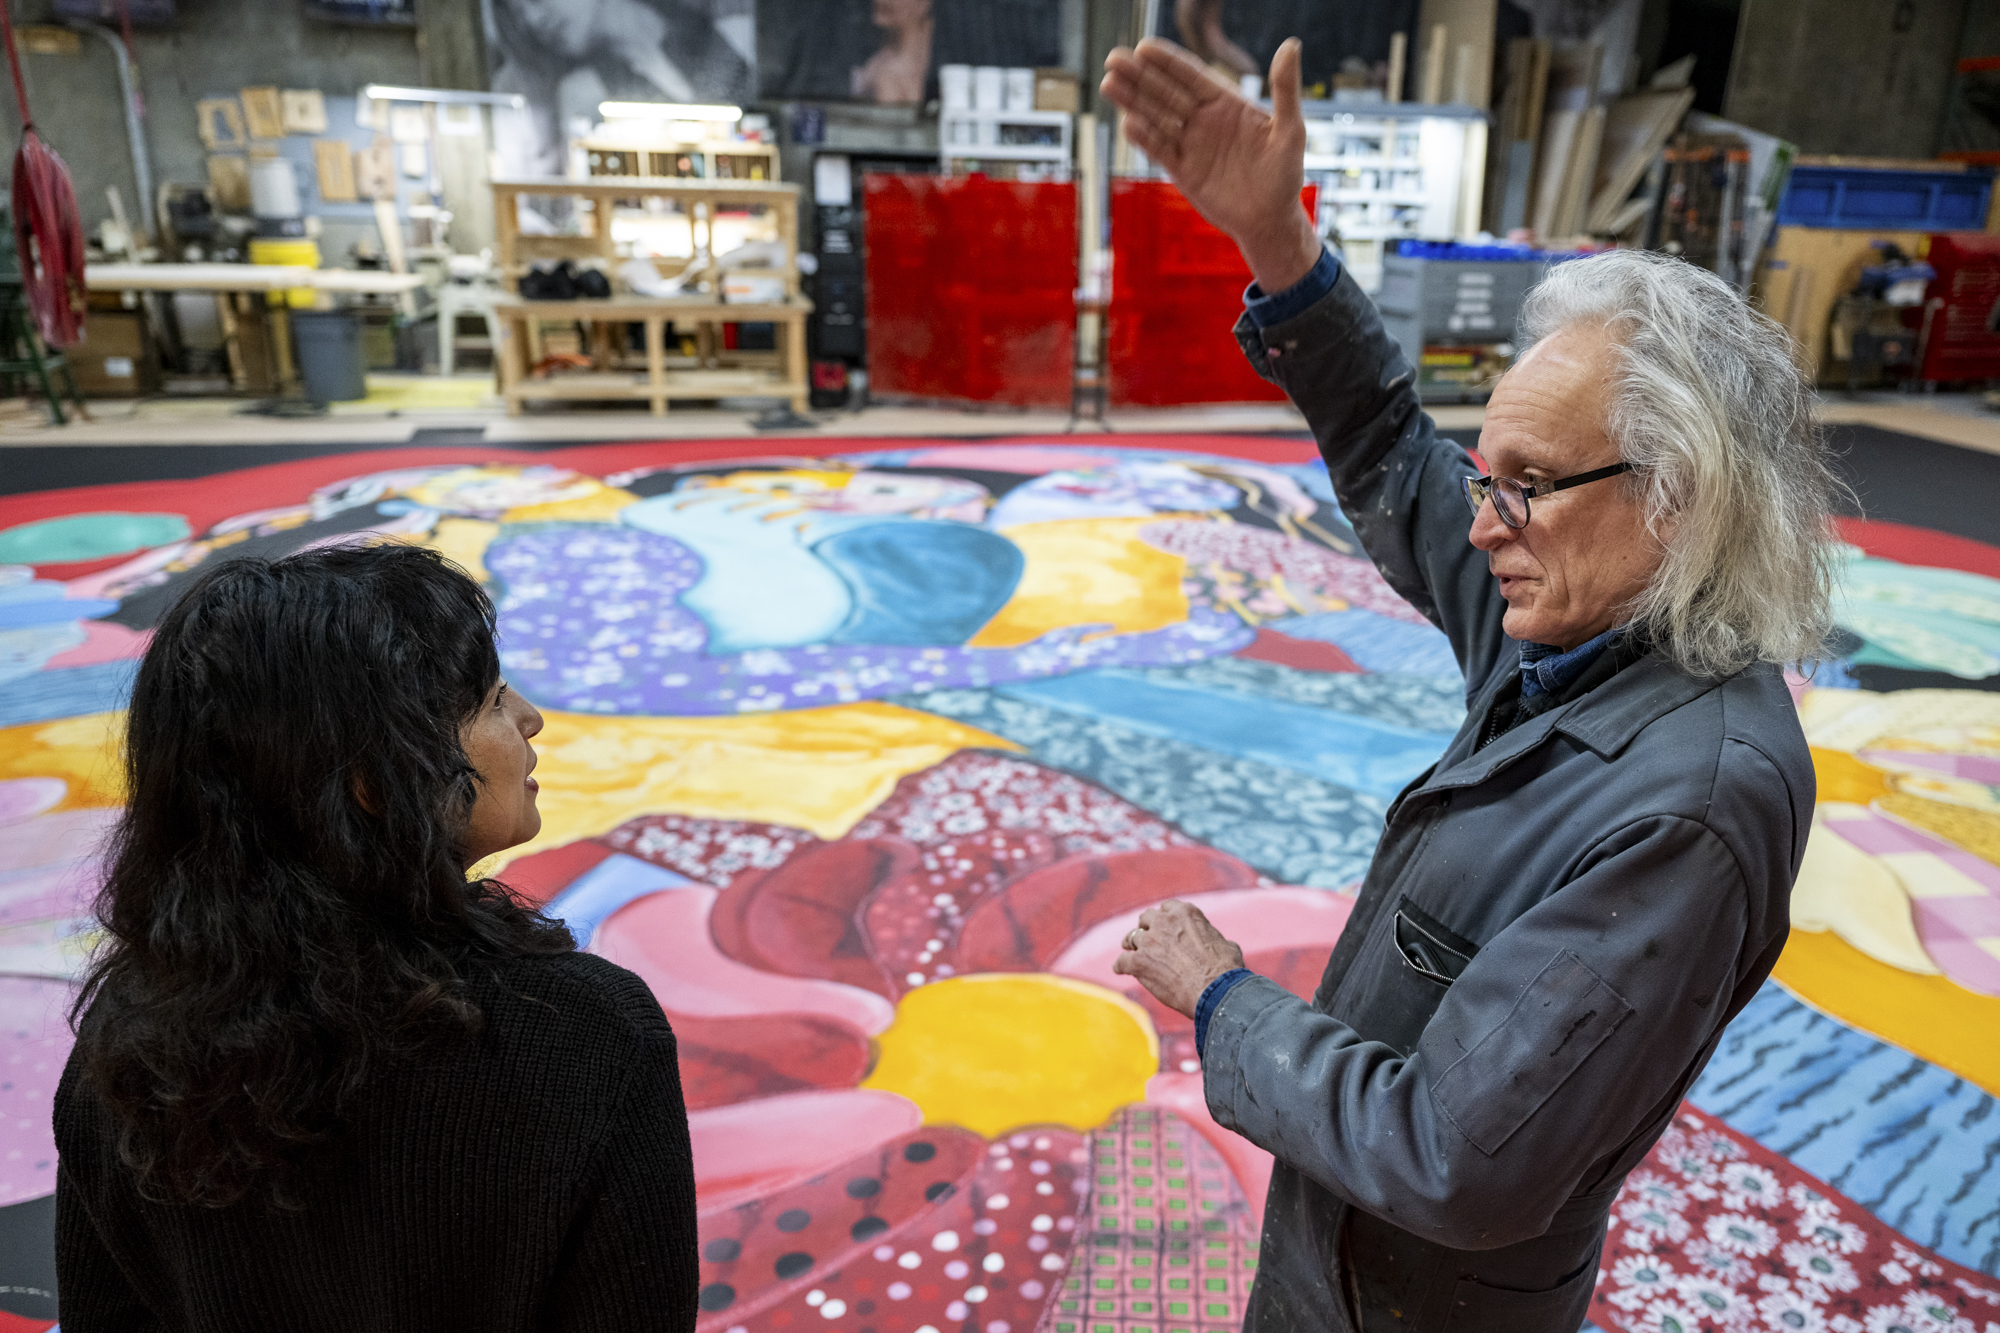 Two people talk, one gestures with arms in front of brightly painted large canvas on floor